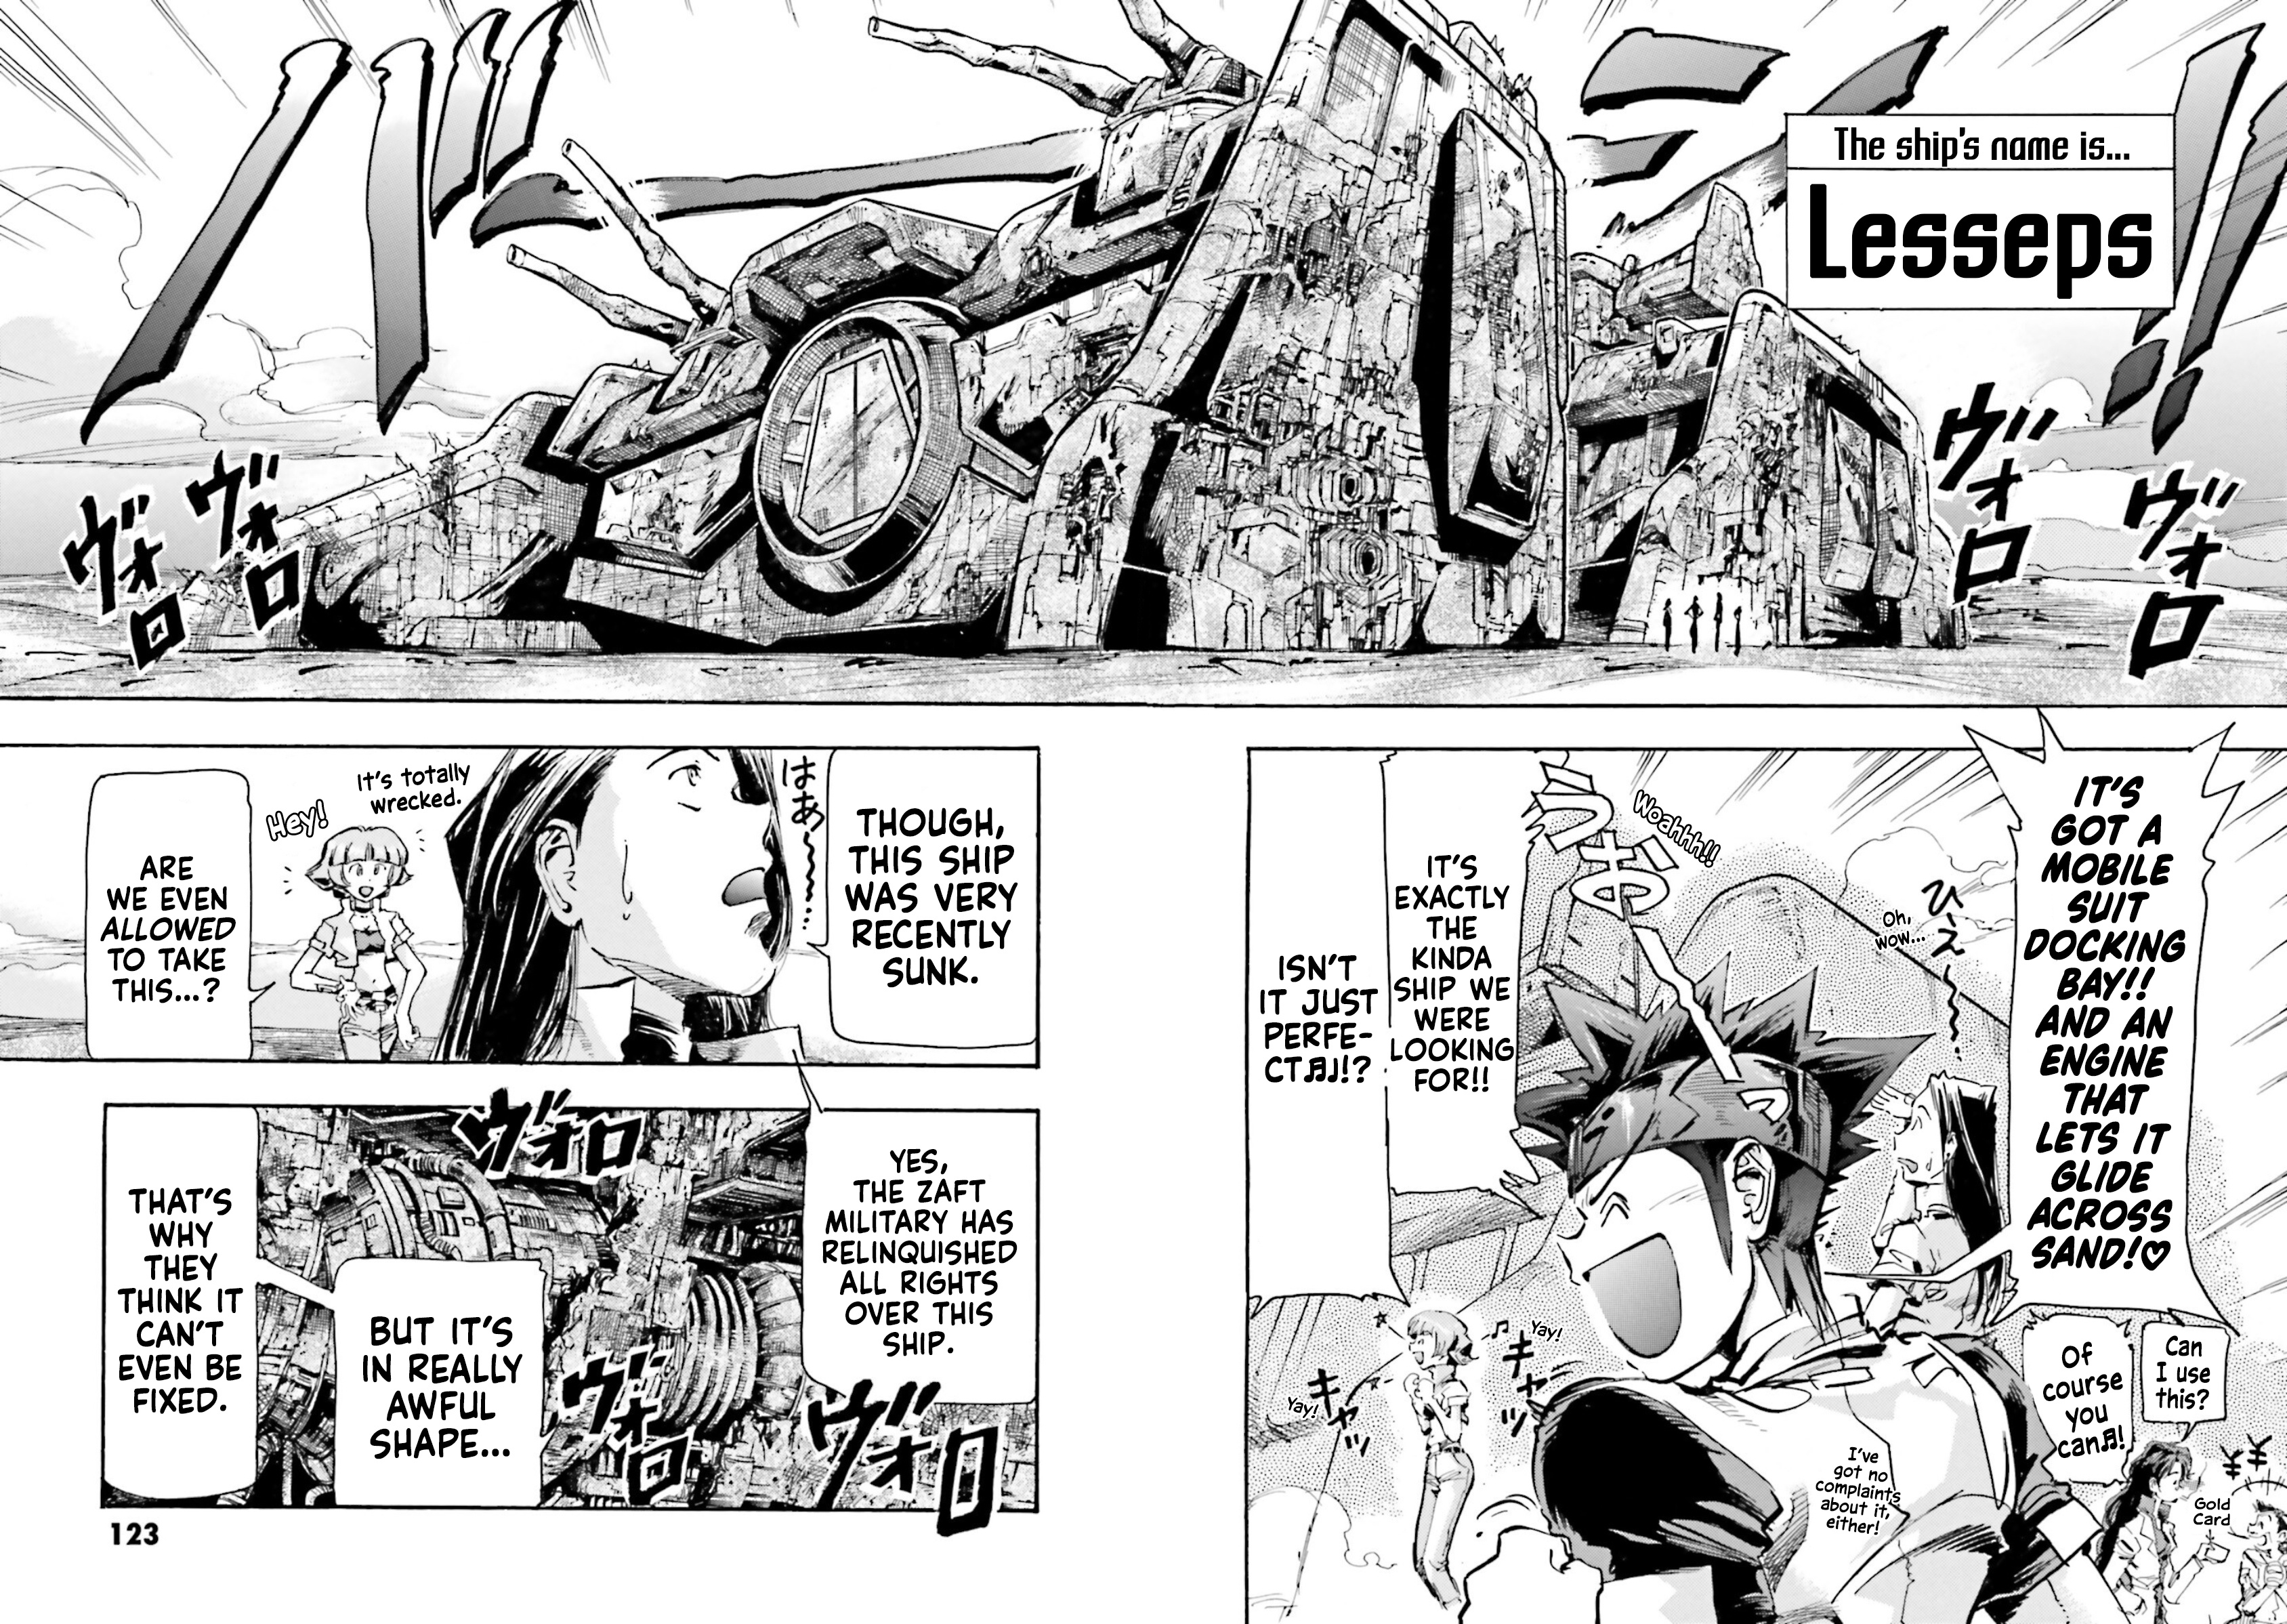 Mobile Suit Gundam Seed Astray R Vol.2 Chapter 8: The New Mothership: Lesseps - Picture 2